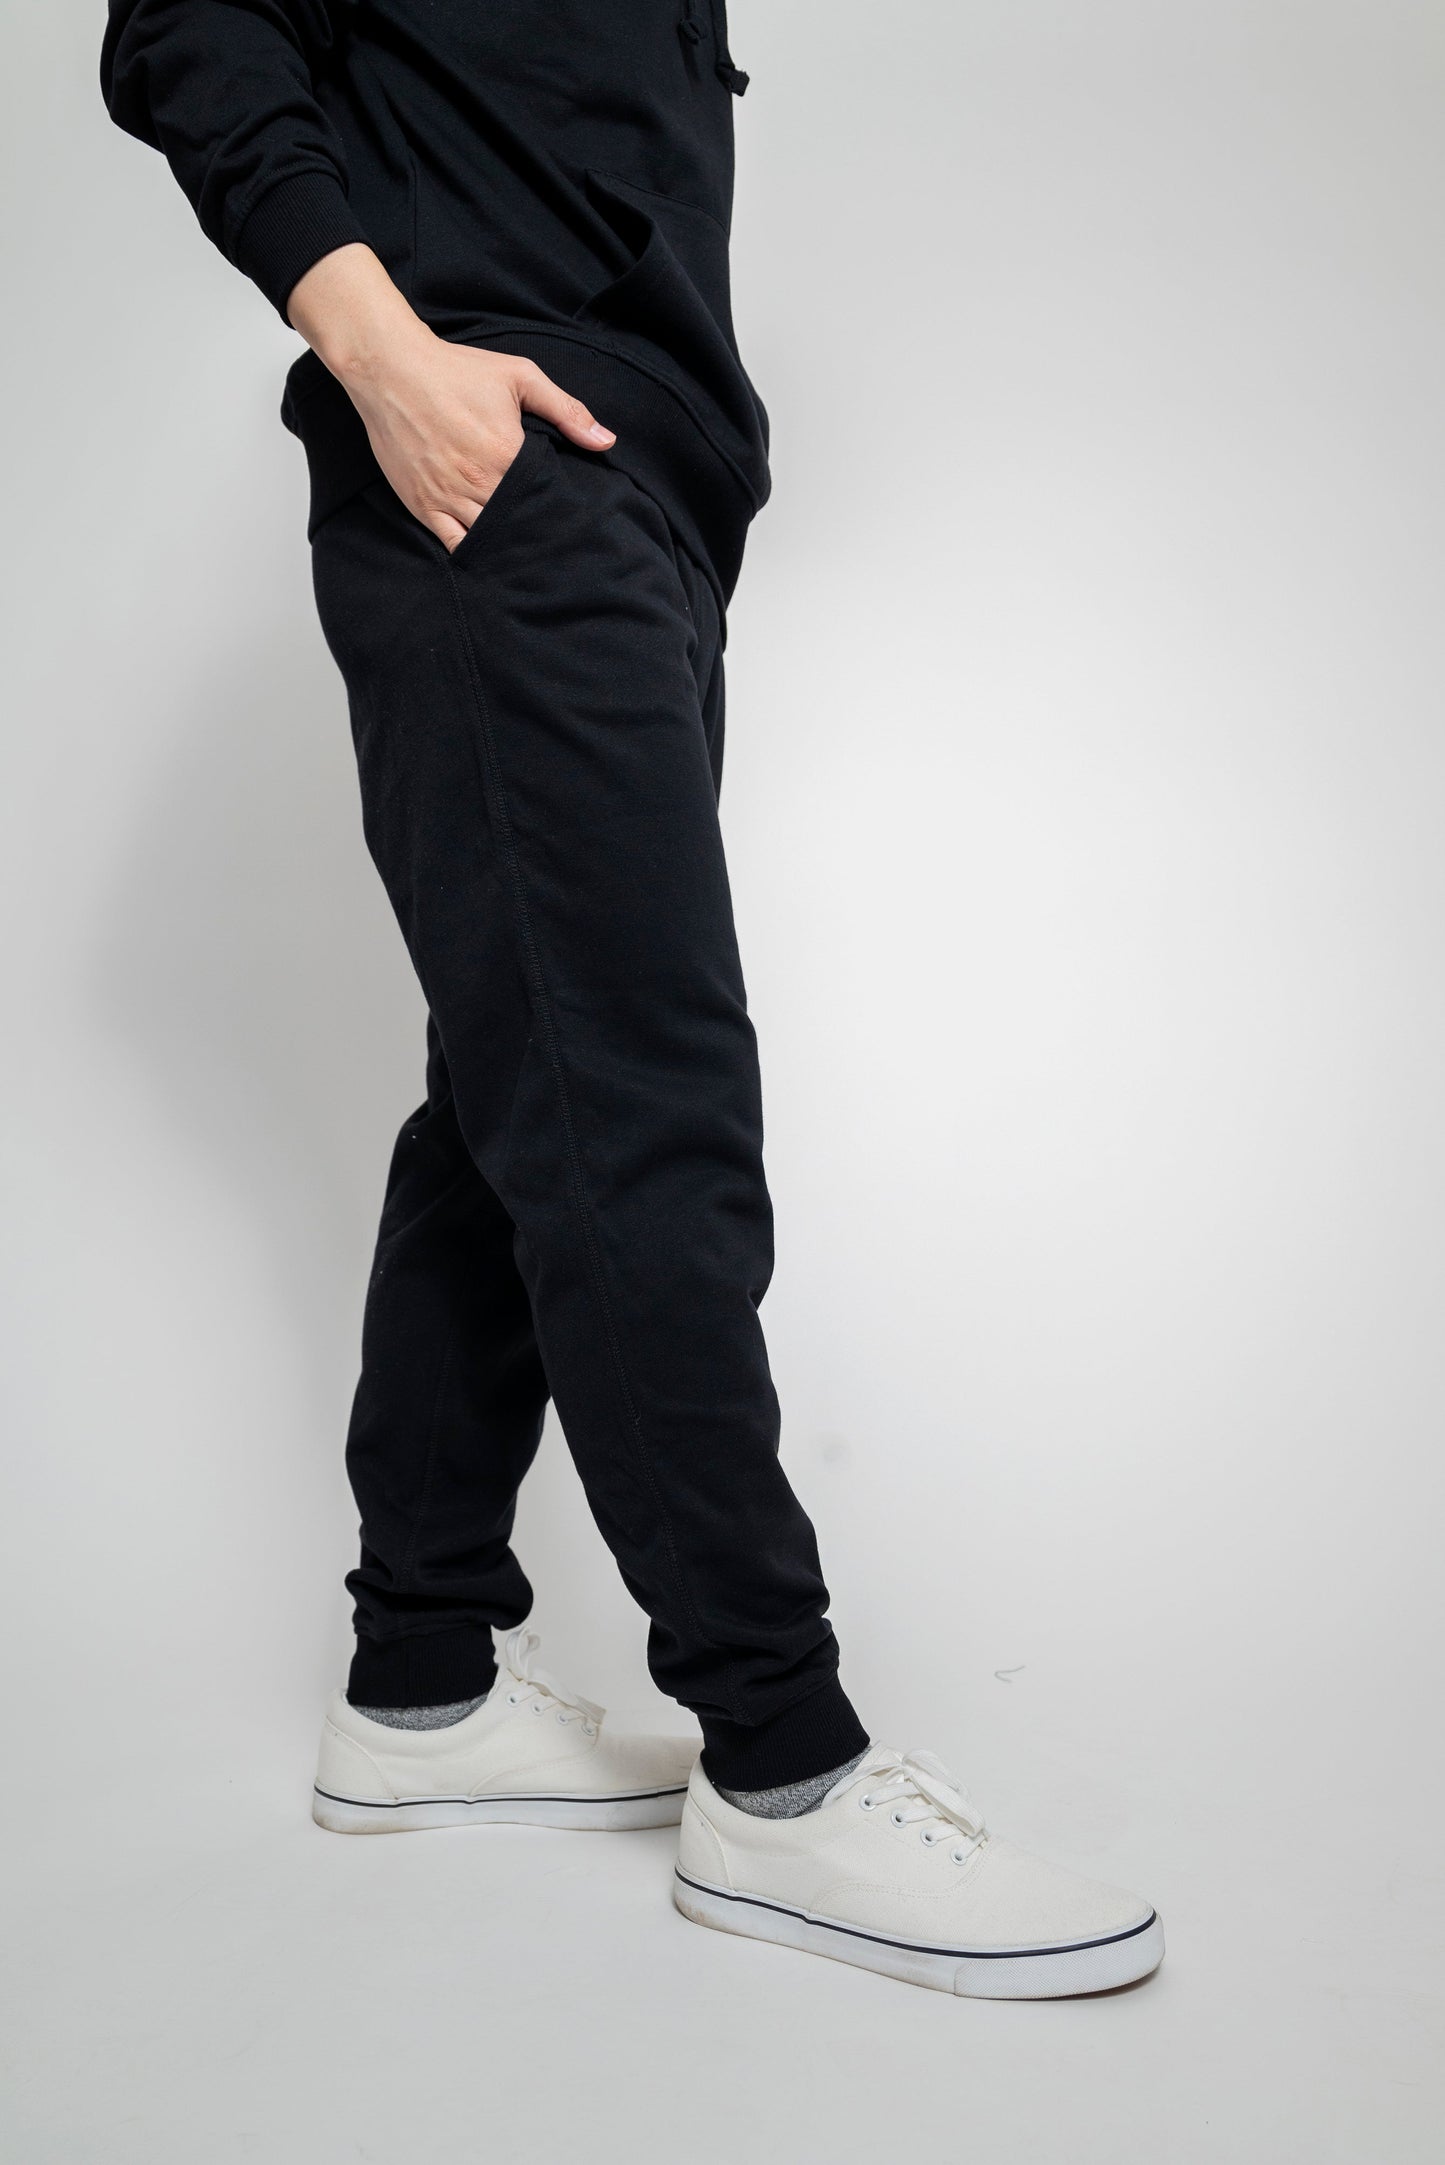 Adult Unisex French Terry Pants